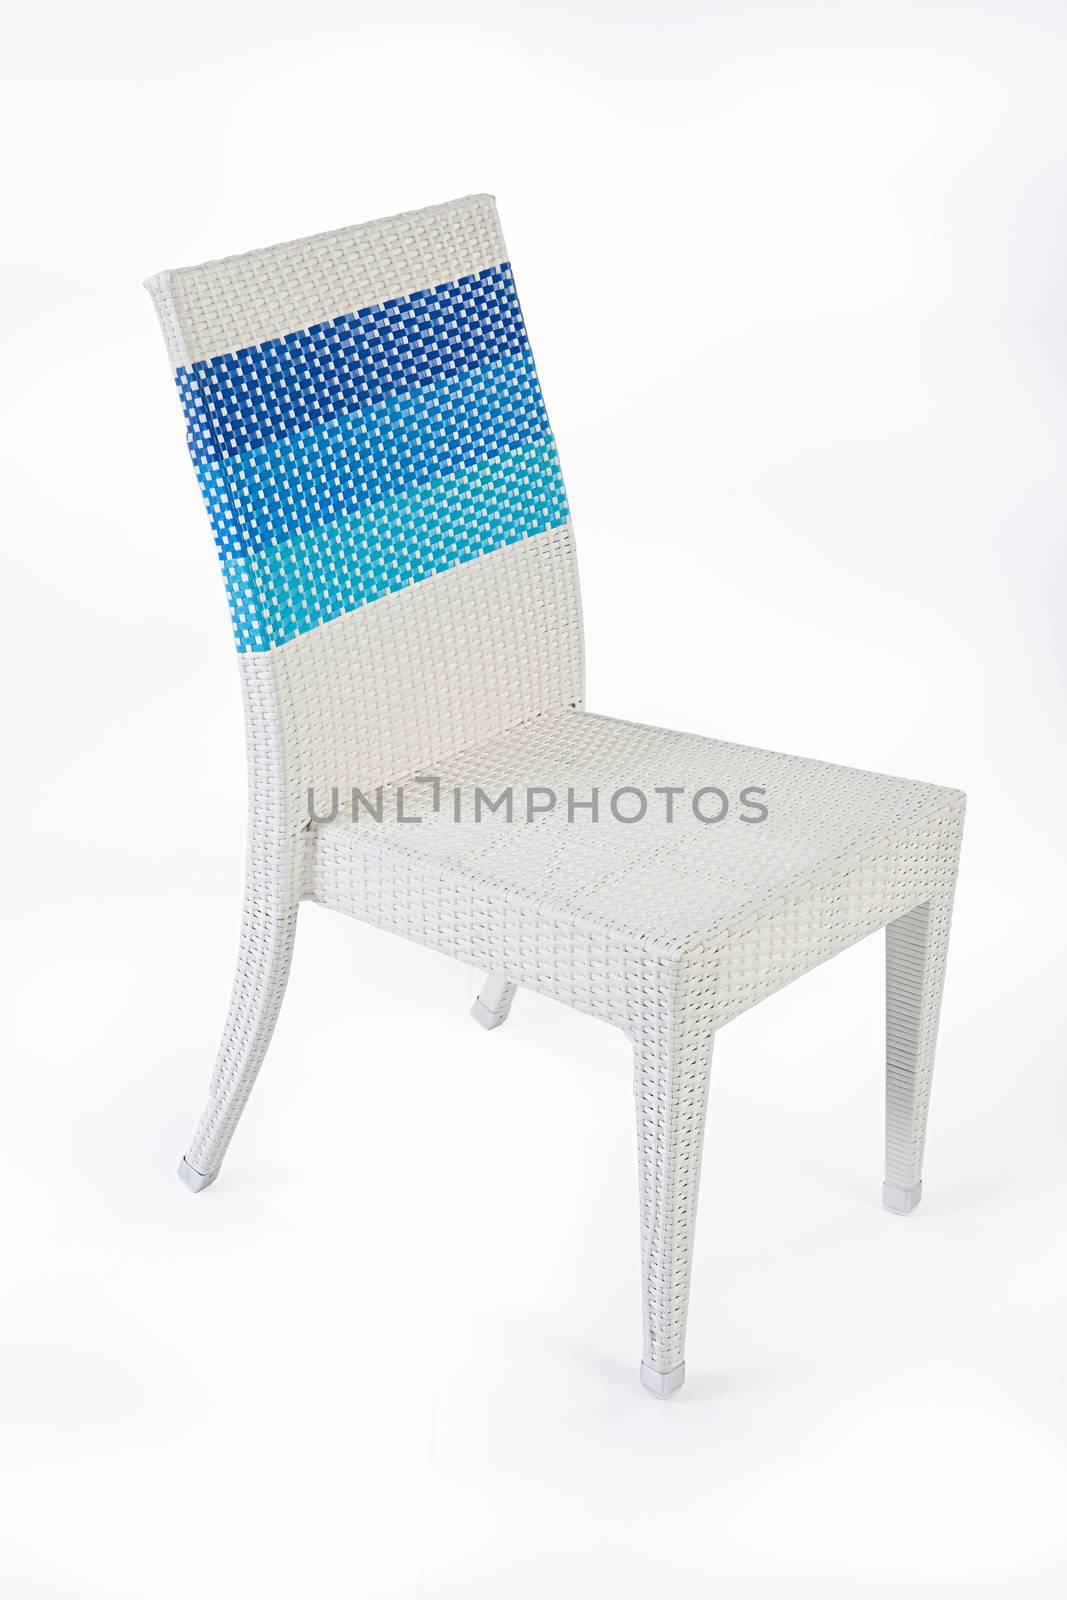 Chair made synthetic fibre on isolated background